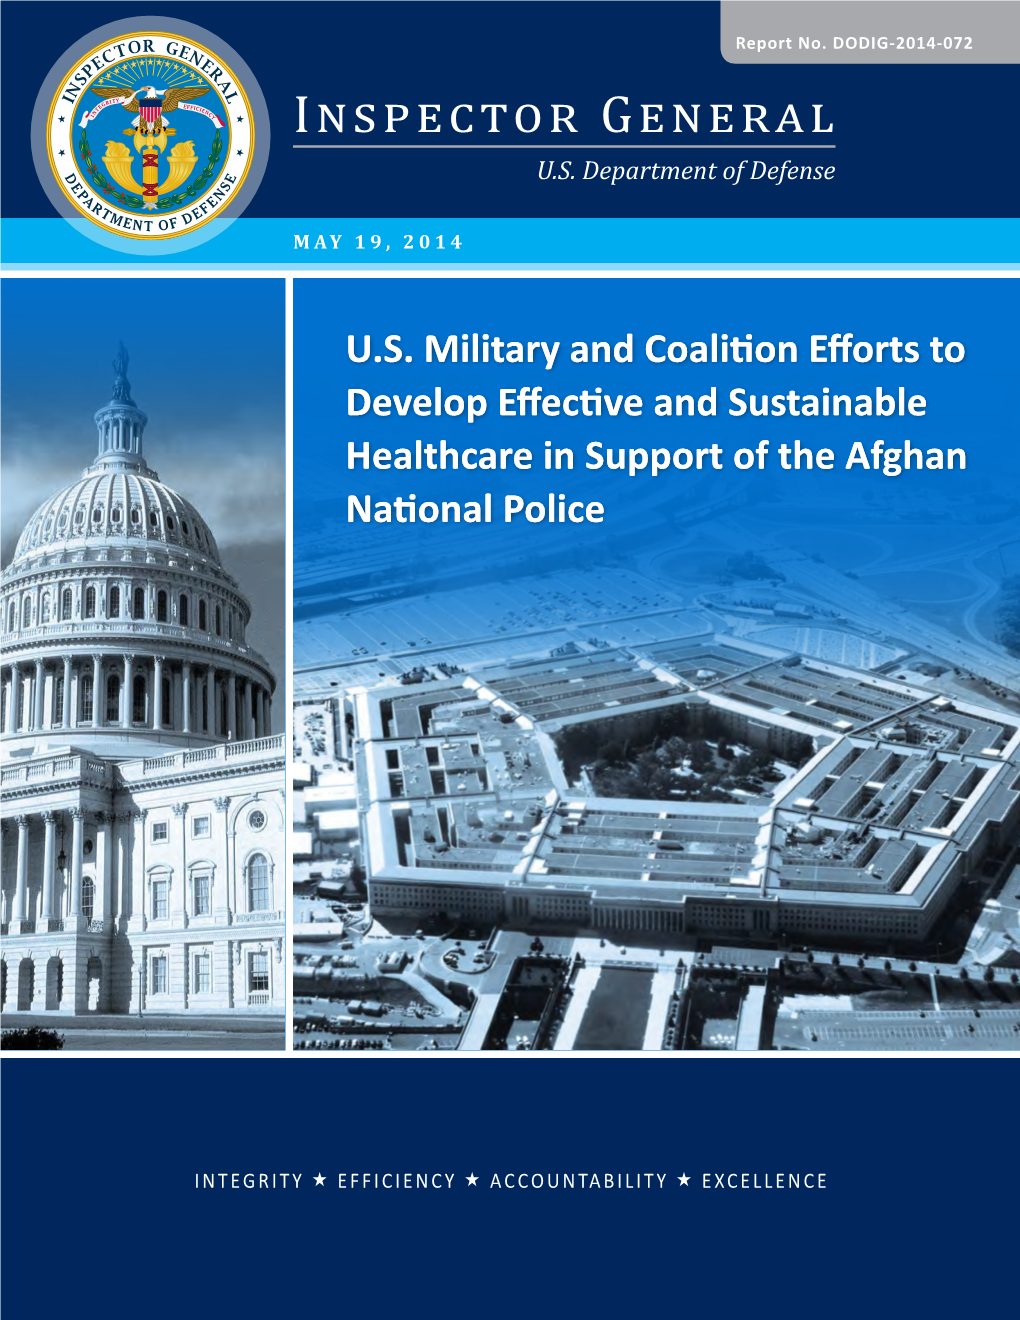 U.S. Military and Coalition Efforts to Develop Effective and Sustainable Healthcare in Support of the Afghan National Police